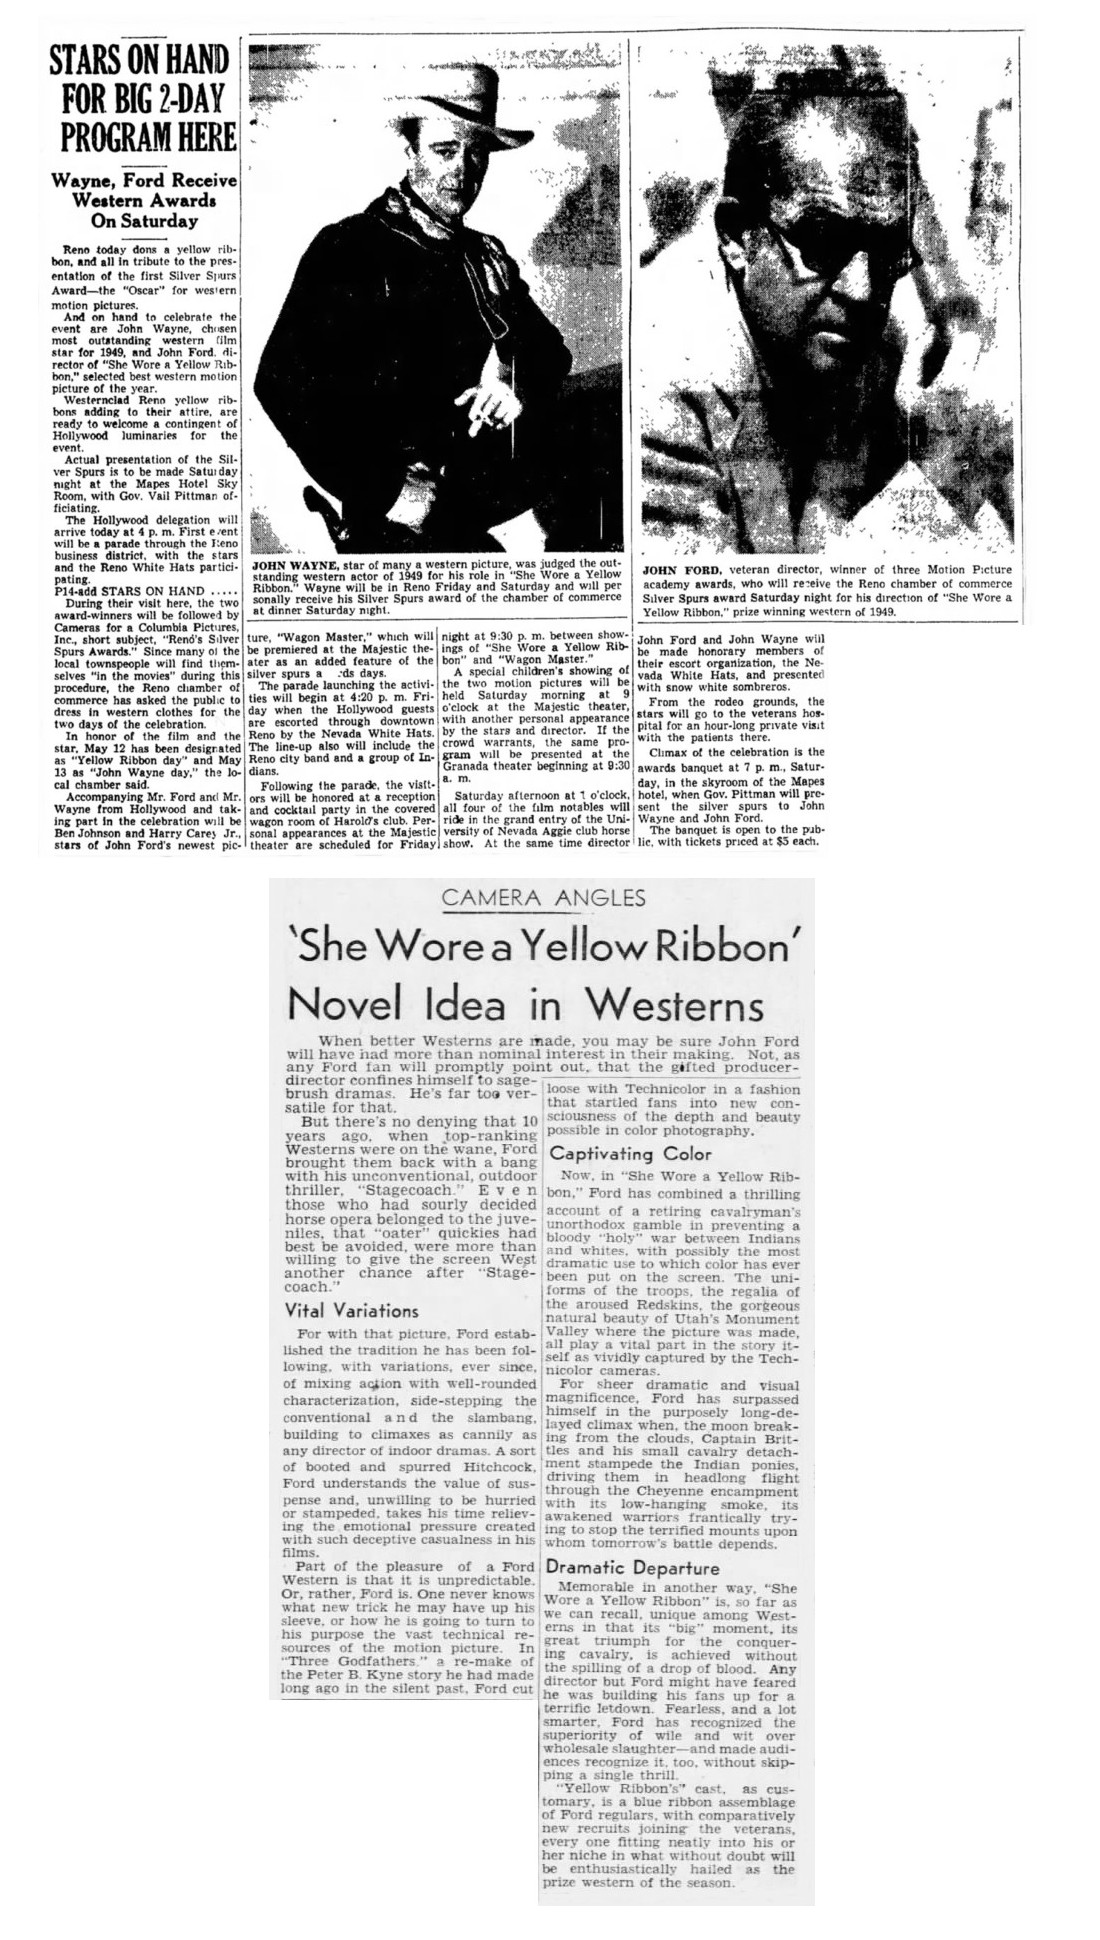 She Wore a Yellow Ribbon article film review